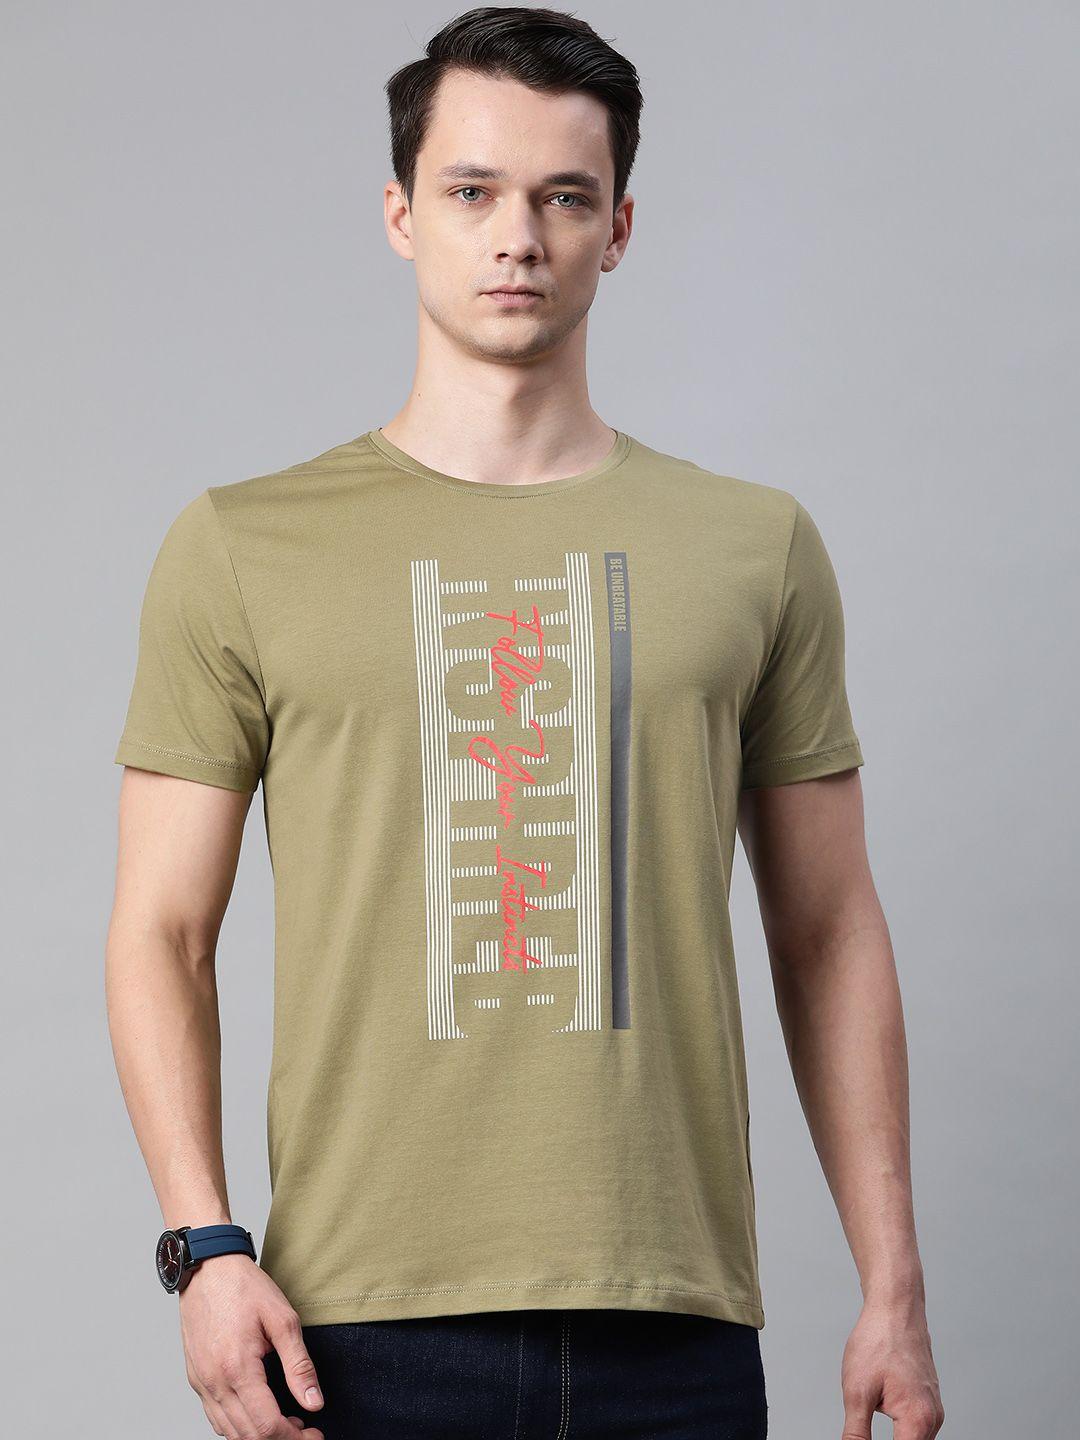 pierre carlo men olive green & white typography printed t-shirt